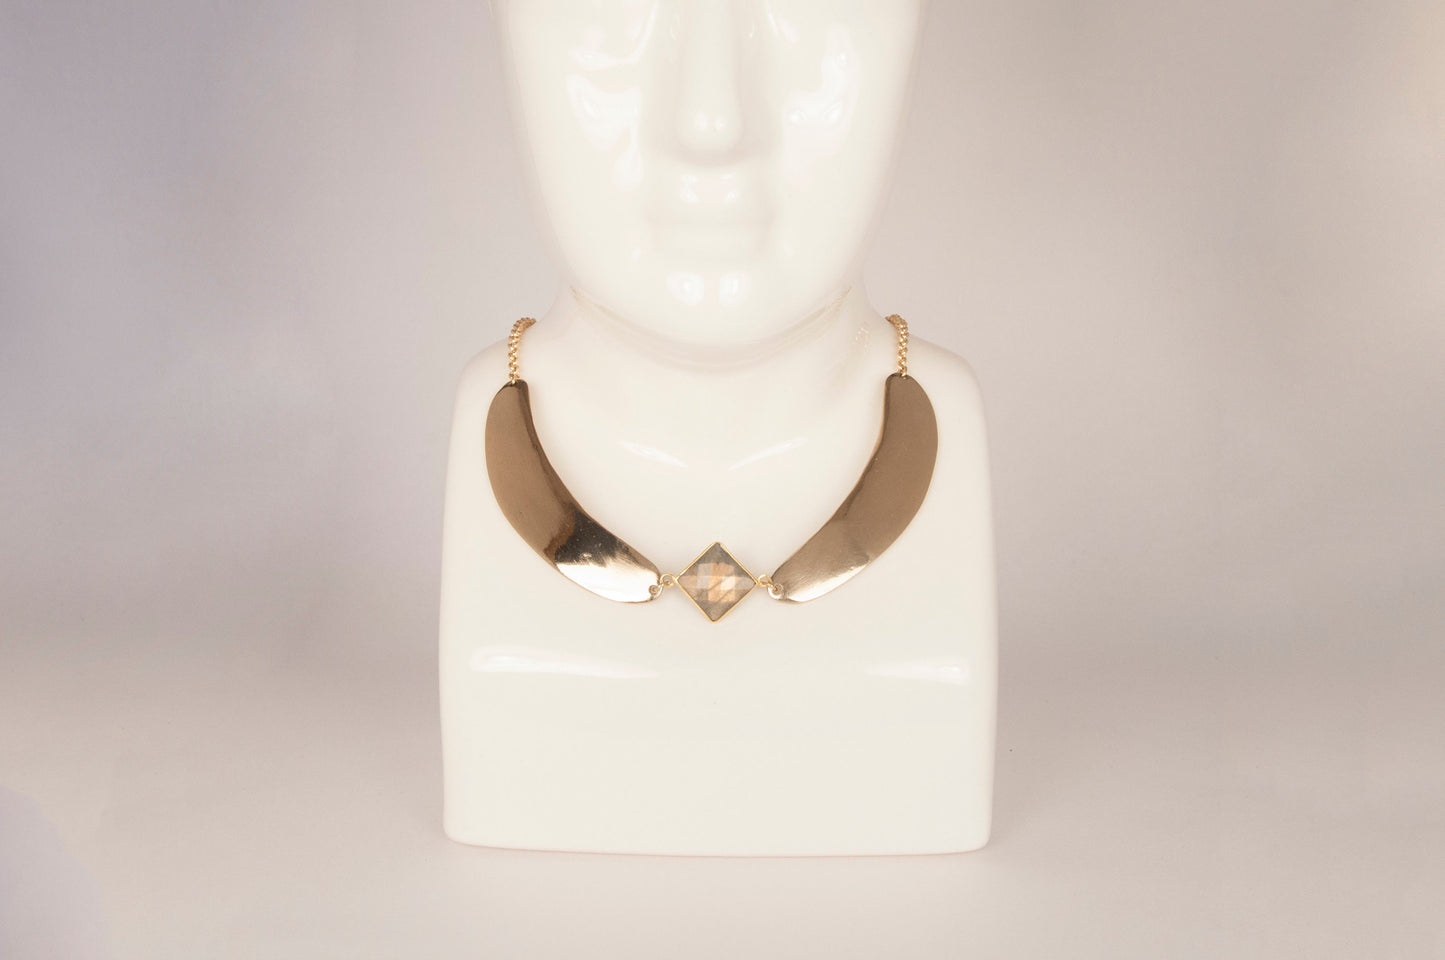 Crystal Collar Necklace or Crown